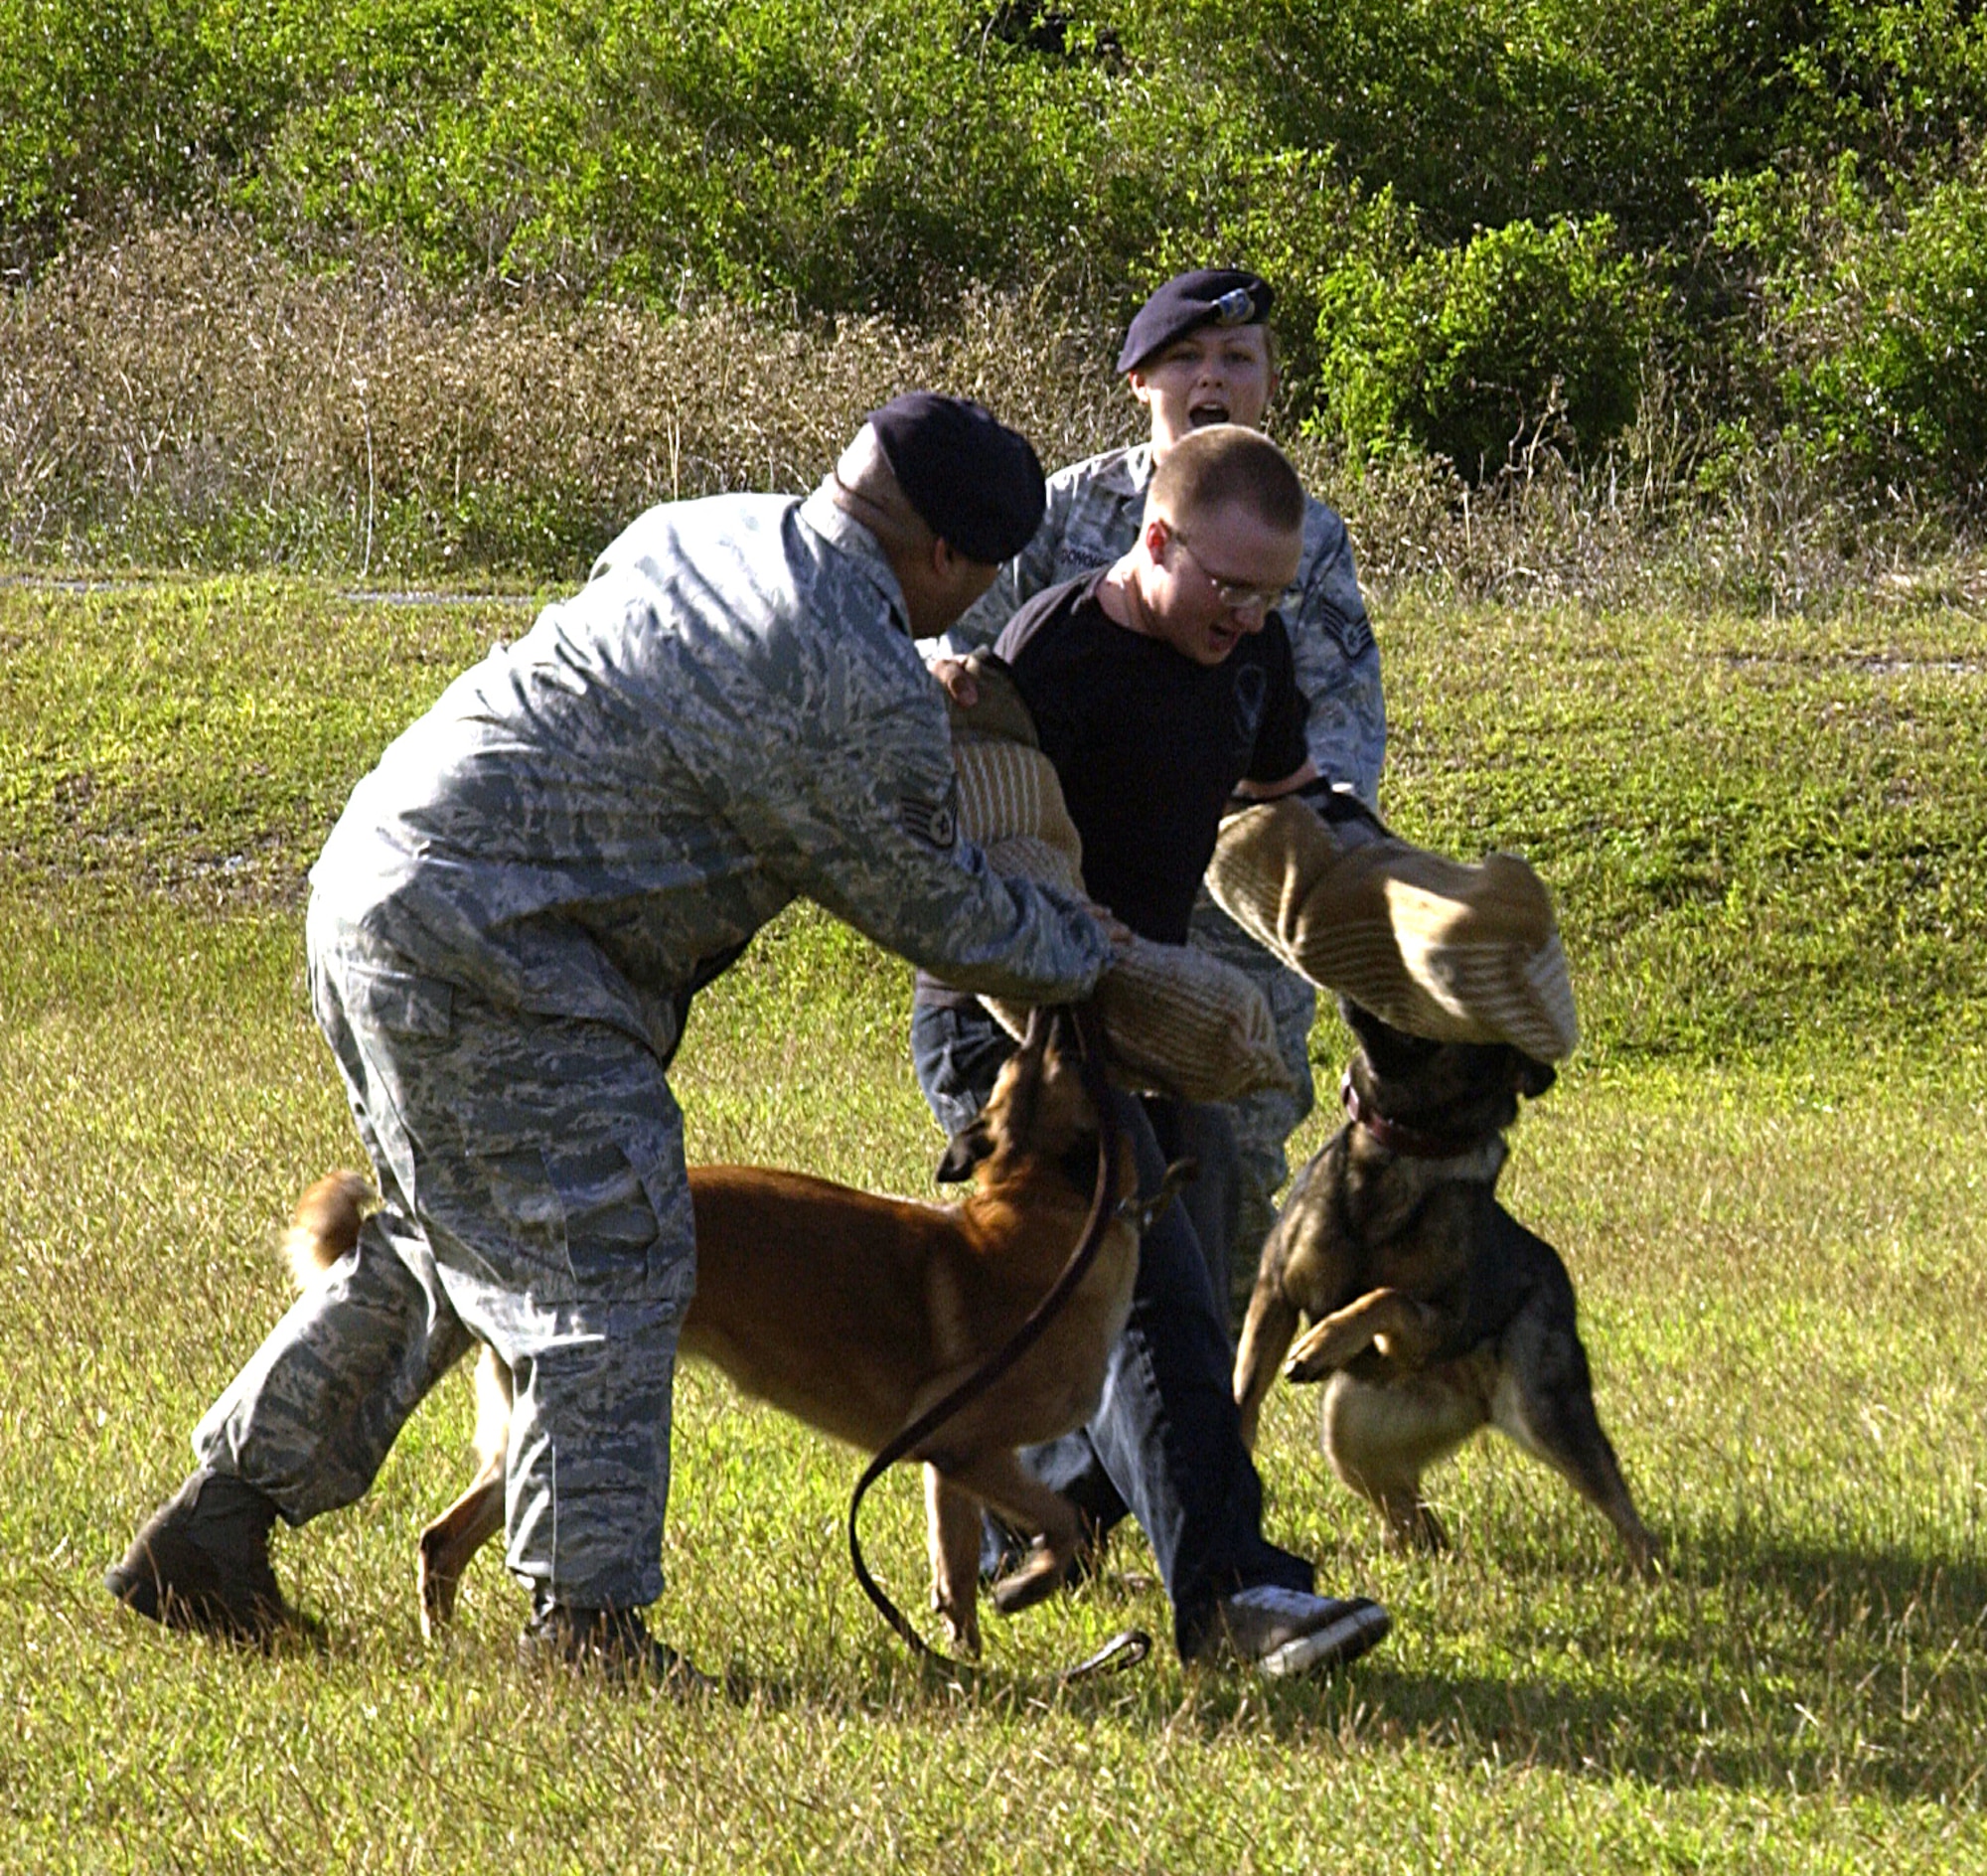 ANDERSEN AIR FORCE BASE, Guam -- Staff Sgts. Jorge Davila and Darlene Donoho, 36th Security Forces Squadron military working dog handlers competing as Team Underdogs, order to their MWD partners Cila and Aika to release Airman 1st Class Christopher Slade, a 36th SFS patrolman acting as a perpetrator, during a MWD competition here Feb. 2.  In the scenario, Airman Slade was trying to run after the team after the canines found drugs during a high-risk traffic stop. Team Underdogs won the competition by a unanimous vote. (U.S. Air Force photo by Airman 1st Class Carissa Wolff)